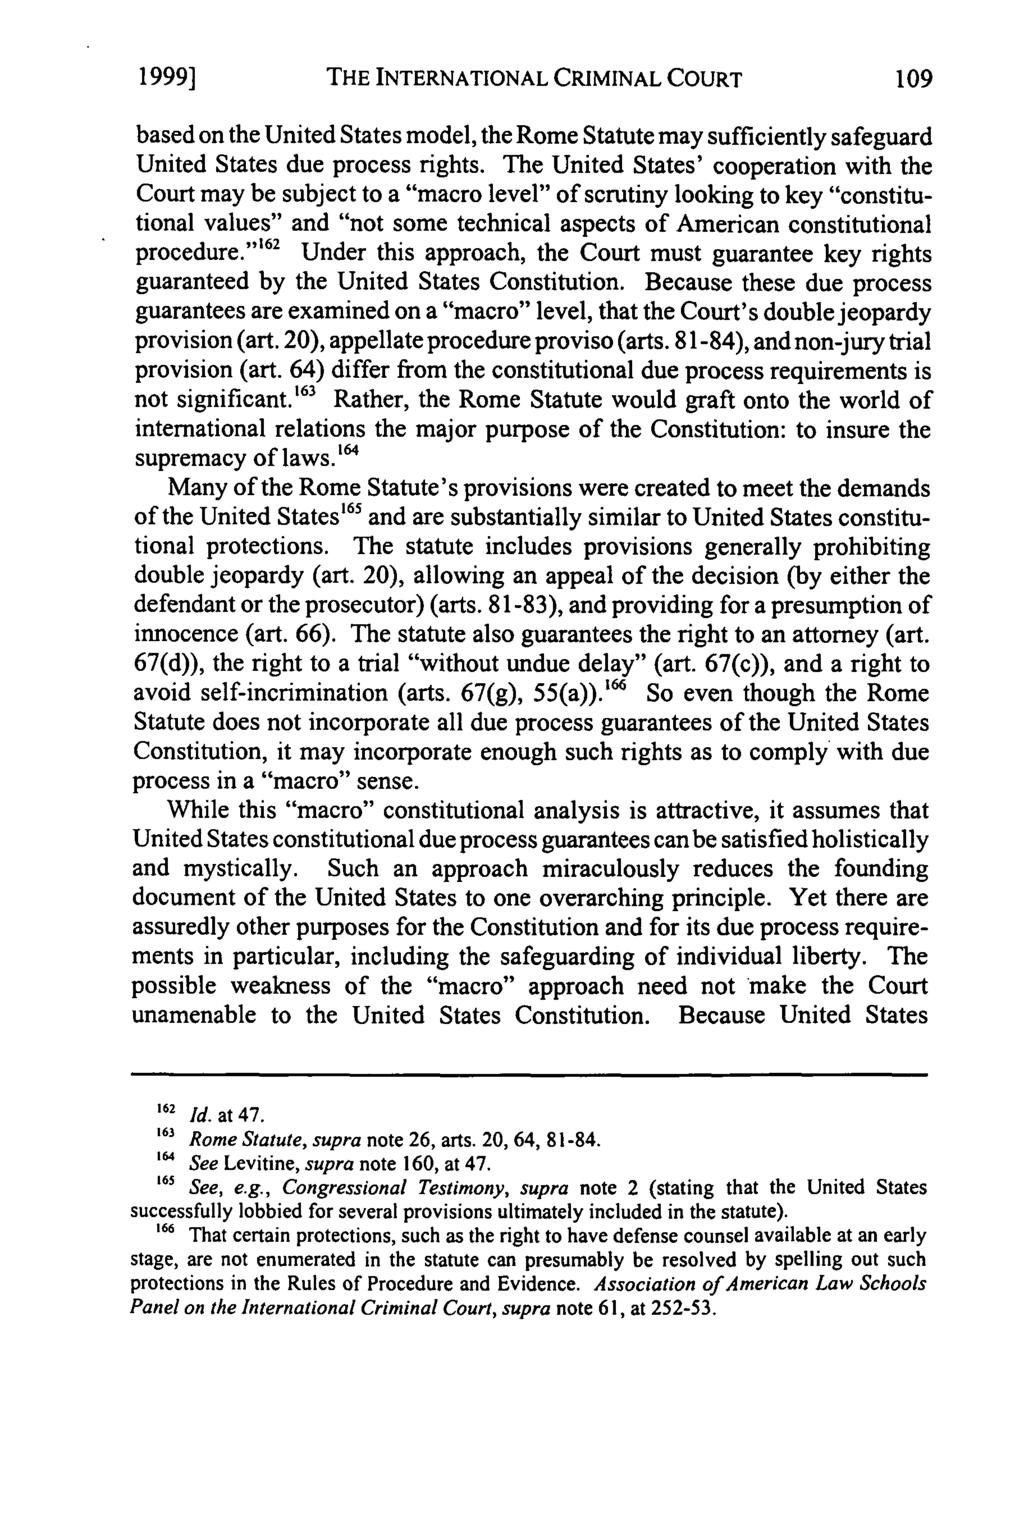 1999] THE INTERNATIONAL CRIMINAL COURT based on the United States model, the Rome Statute may sufficiently safeguard United States due process rights.